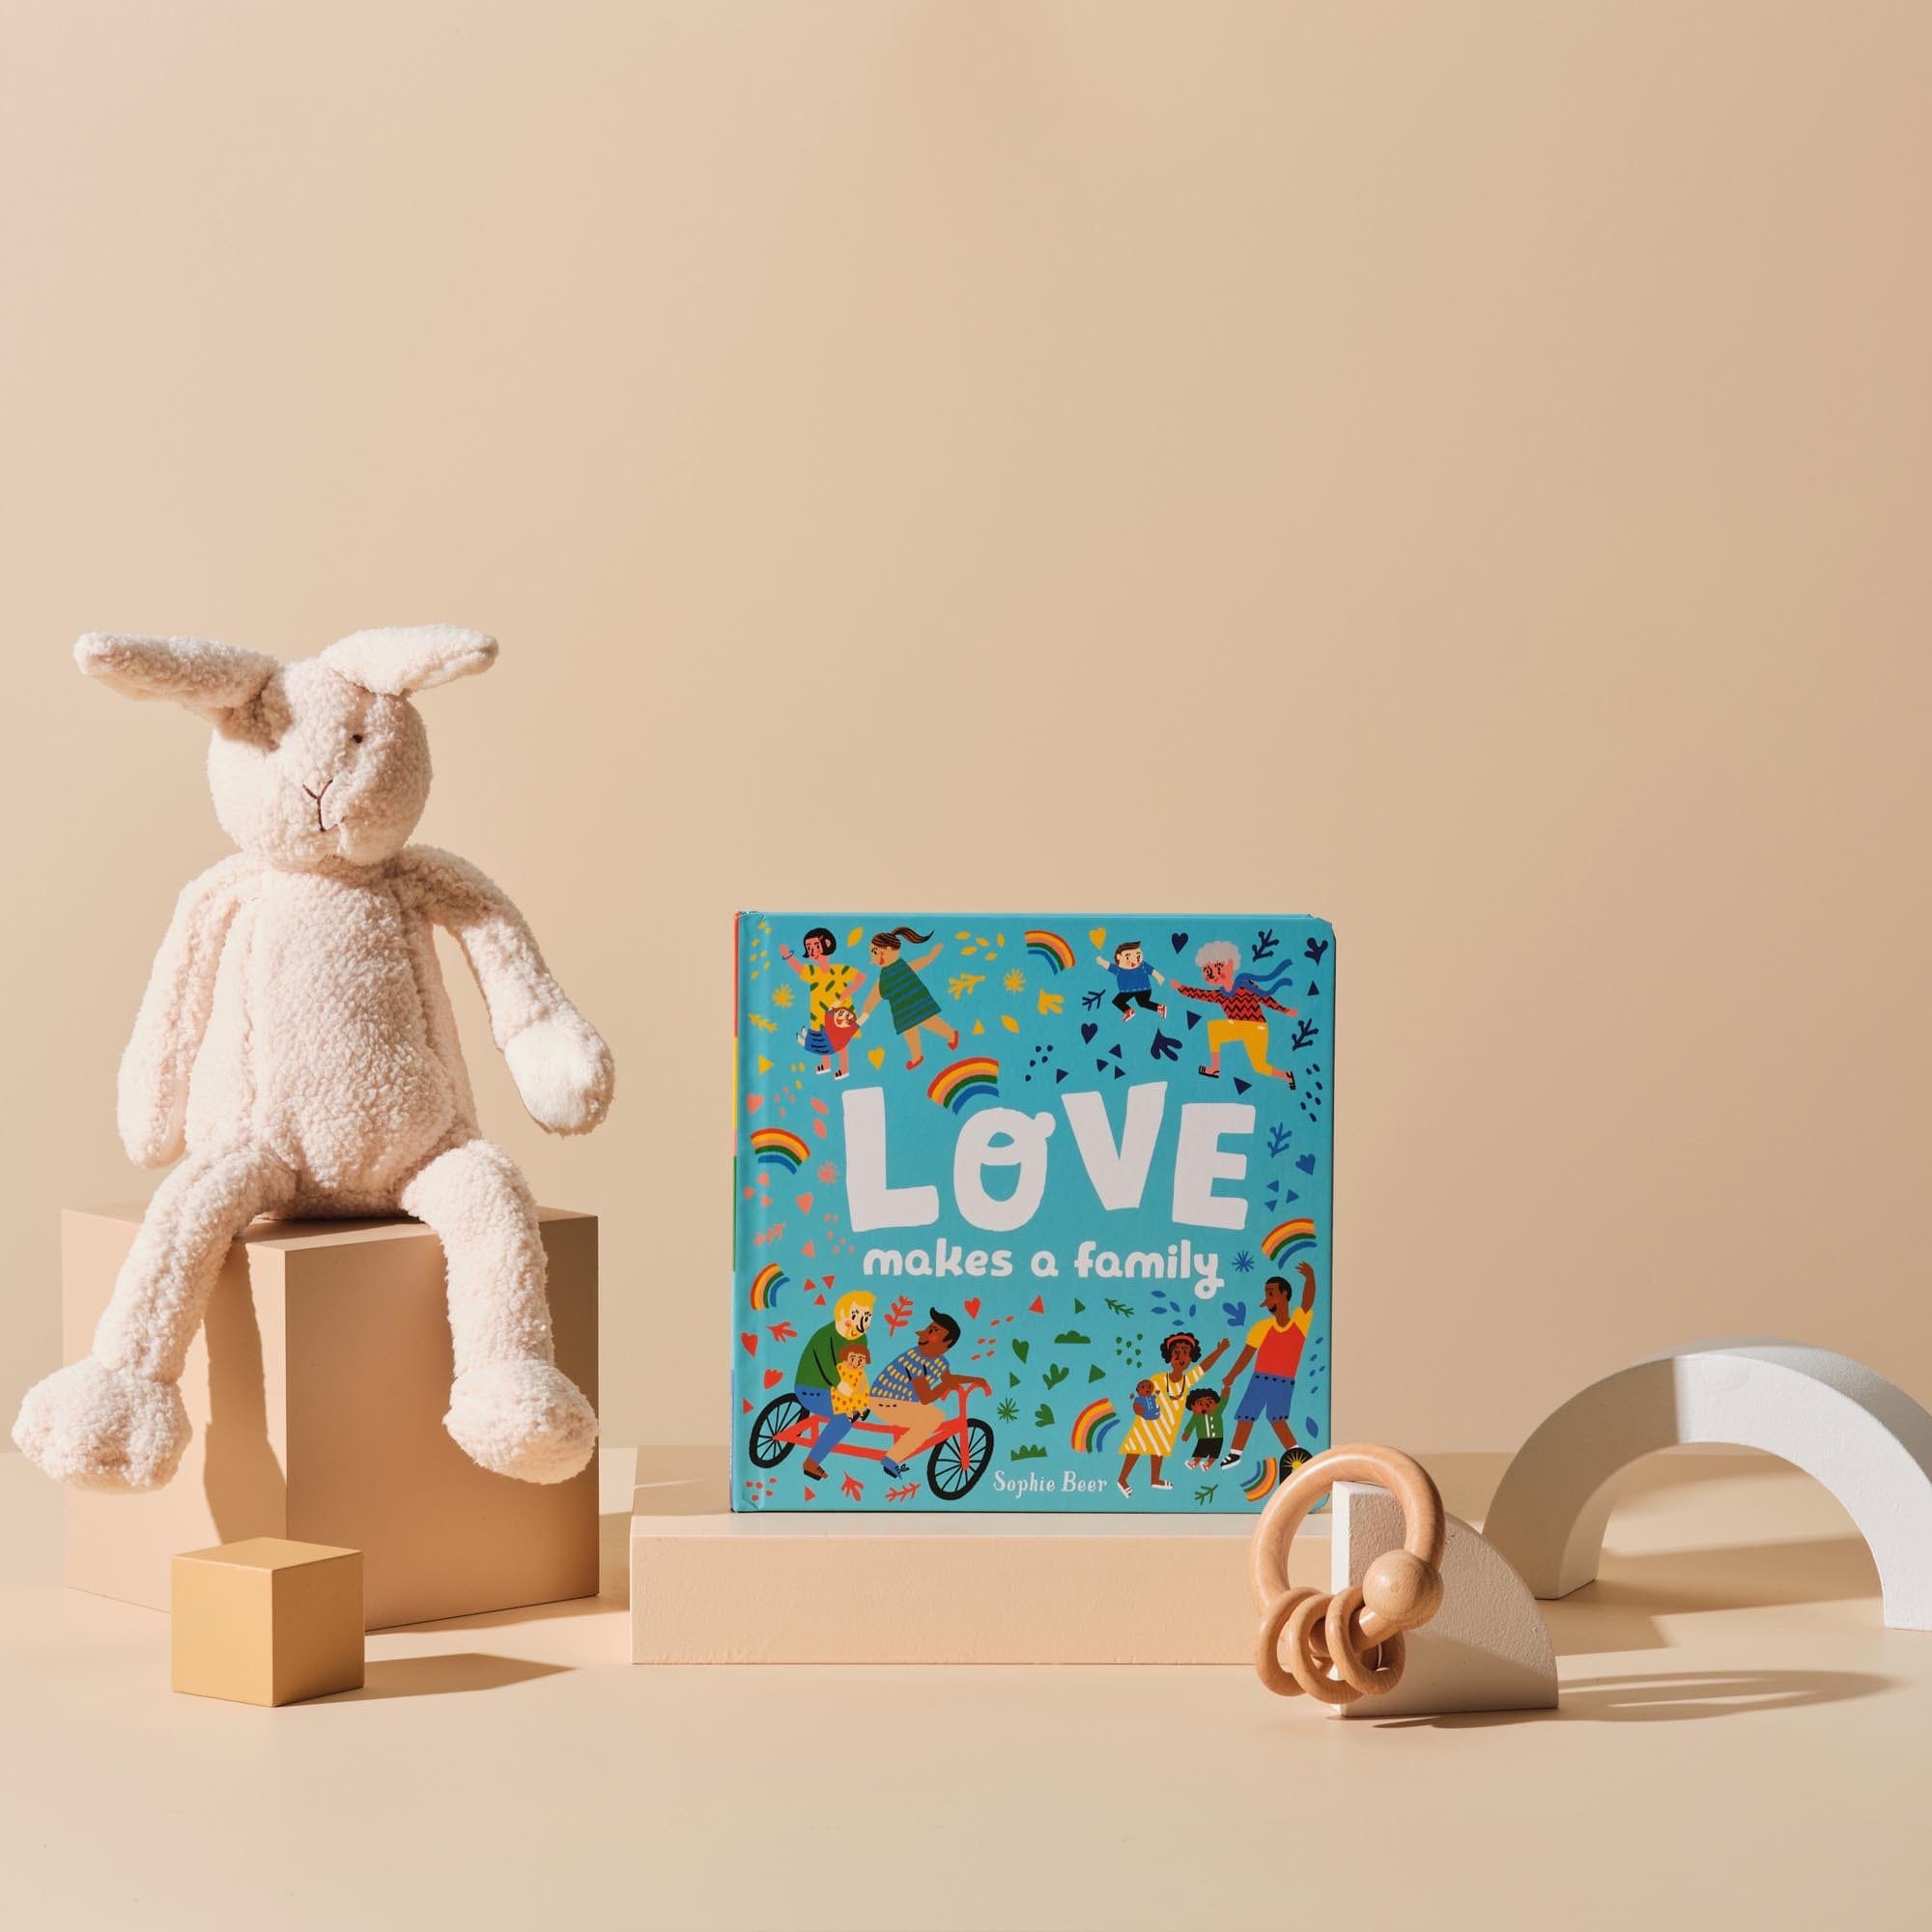 This is the Mum 'n' Bub gift bundle from Handsel. Included in this image is Love makes a family, Bonnie the Bunny and a teething ring